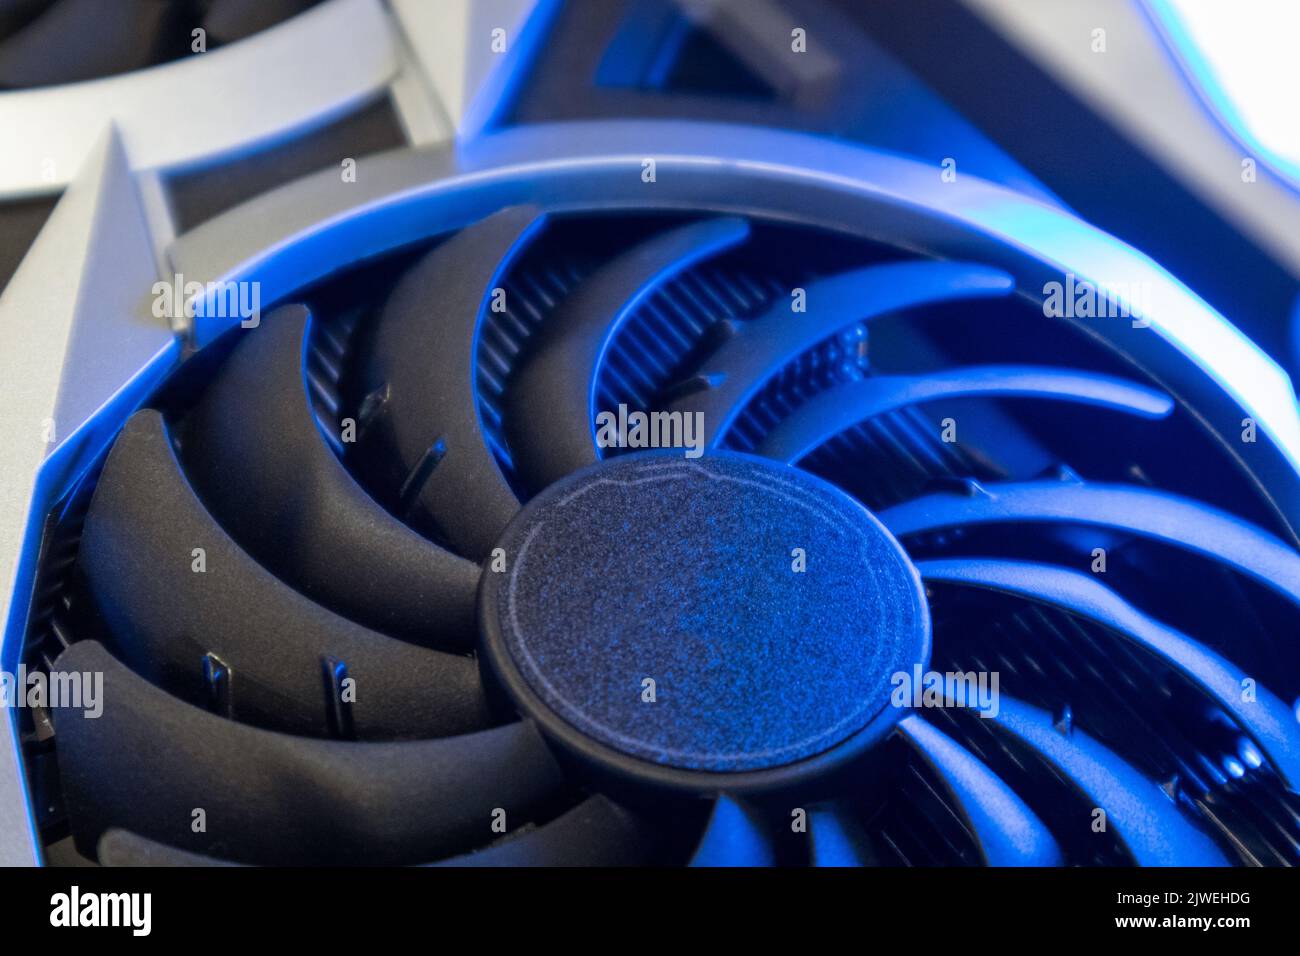 Cooler fan on Gpu graphics video card, close-up in bright blue light, PC hardware details. Components from computer cooling system with selective focu Stock Photo